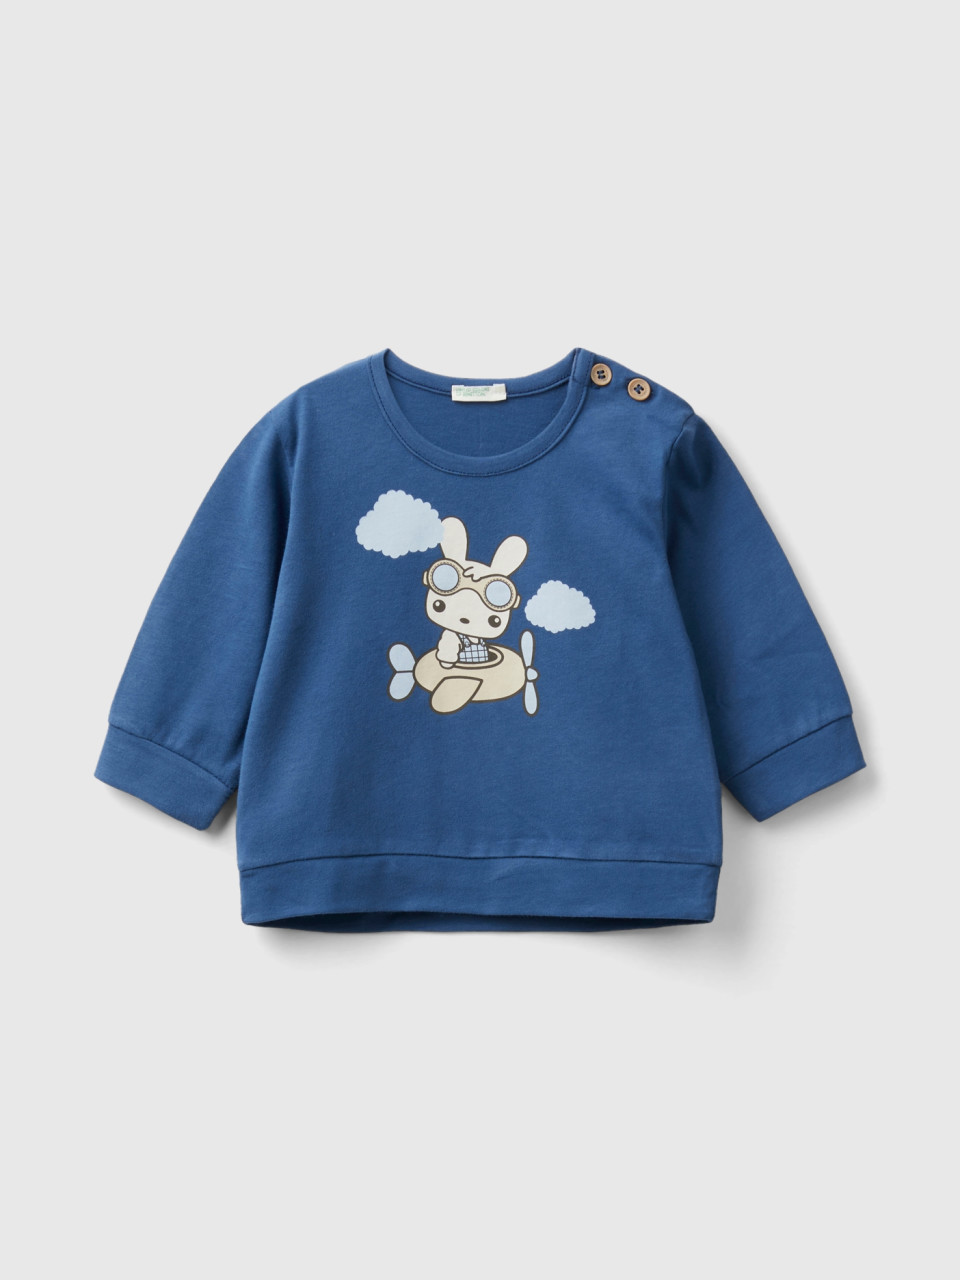 Benetton, Warm T-shirt With Bunny Print, Air Force Blue, Kids